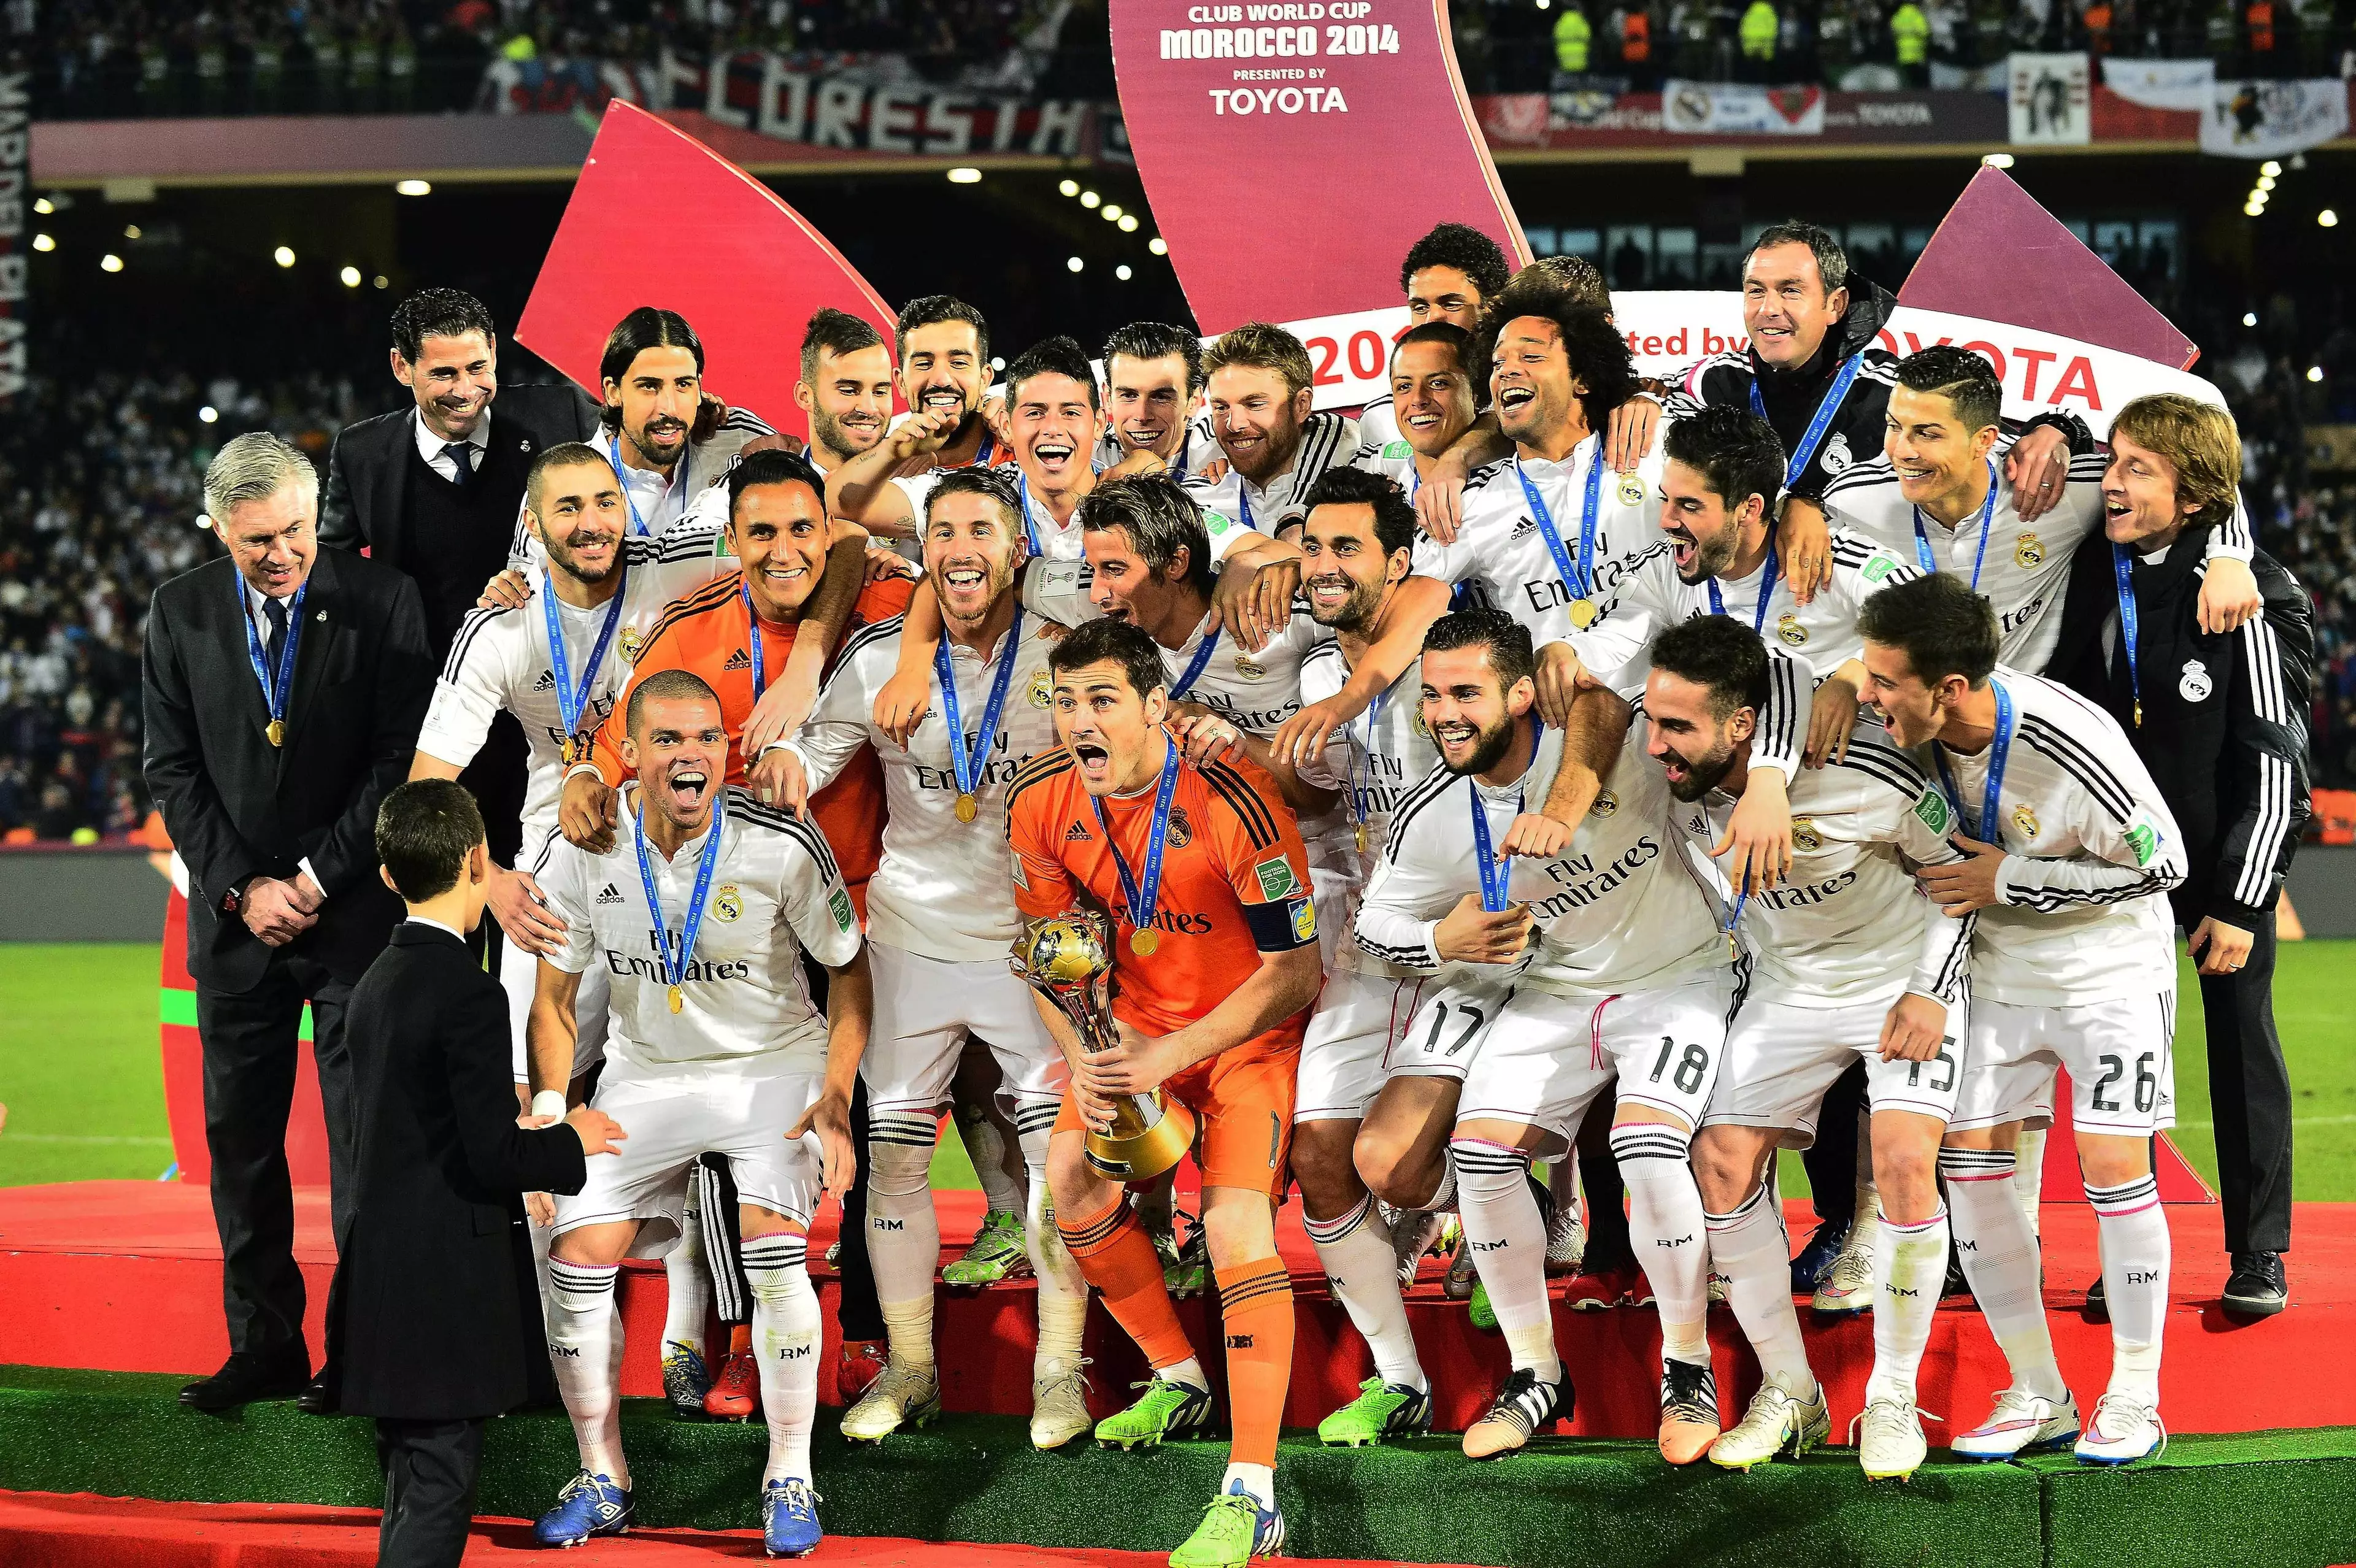 Casillas also lifted the Euros and World Cup with Spain, quite the haul of trophy lifts. Image: PA Images